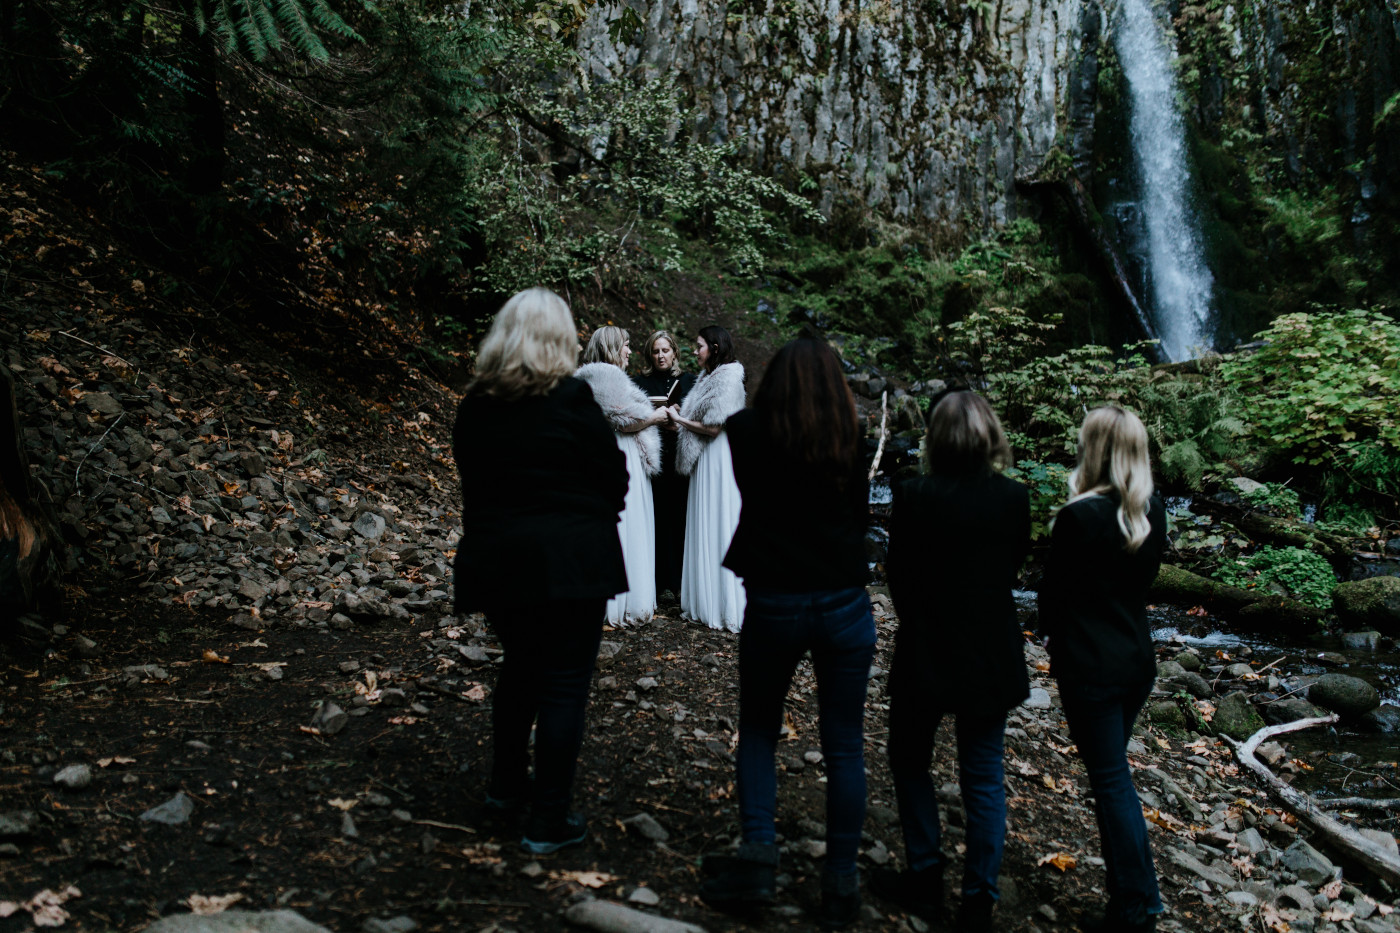 Tiffany and Hayley stand before their loved ones. Elopement photography at the Columbia River Gorge by Sienna Plus Josh.